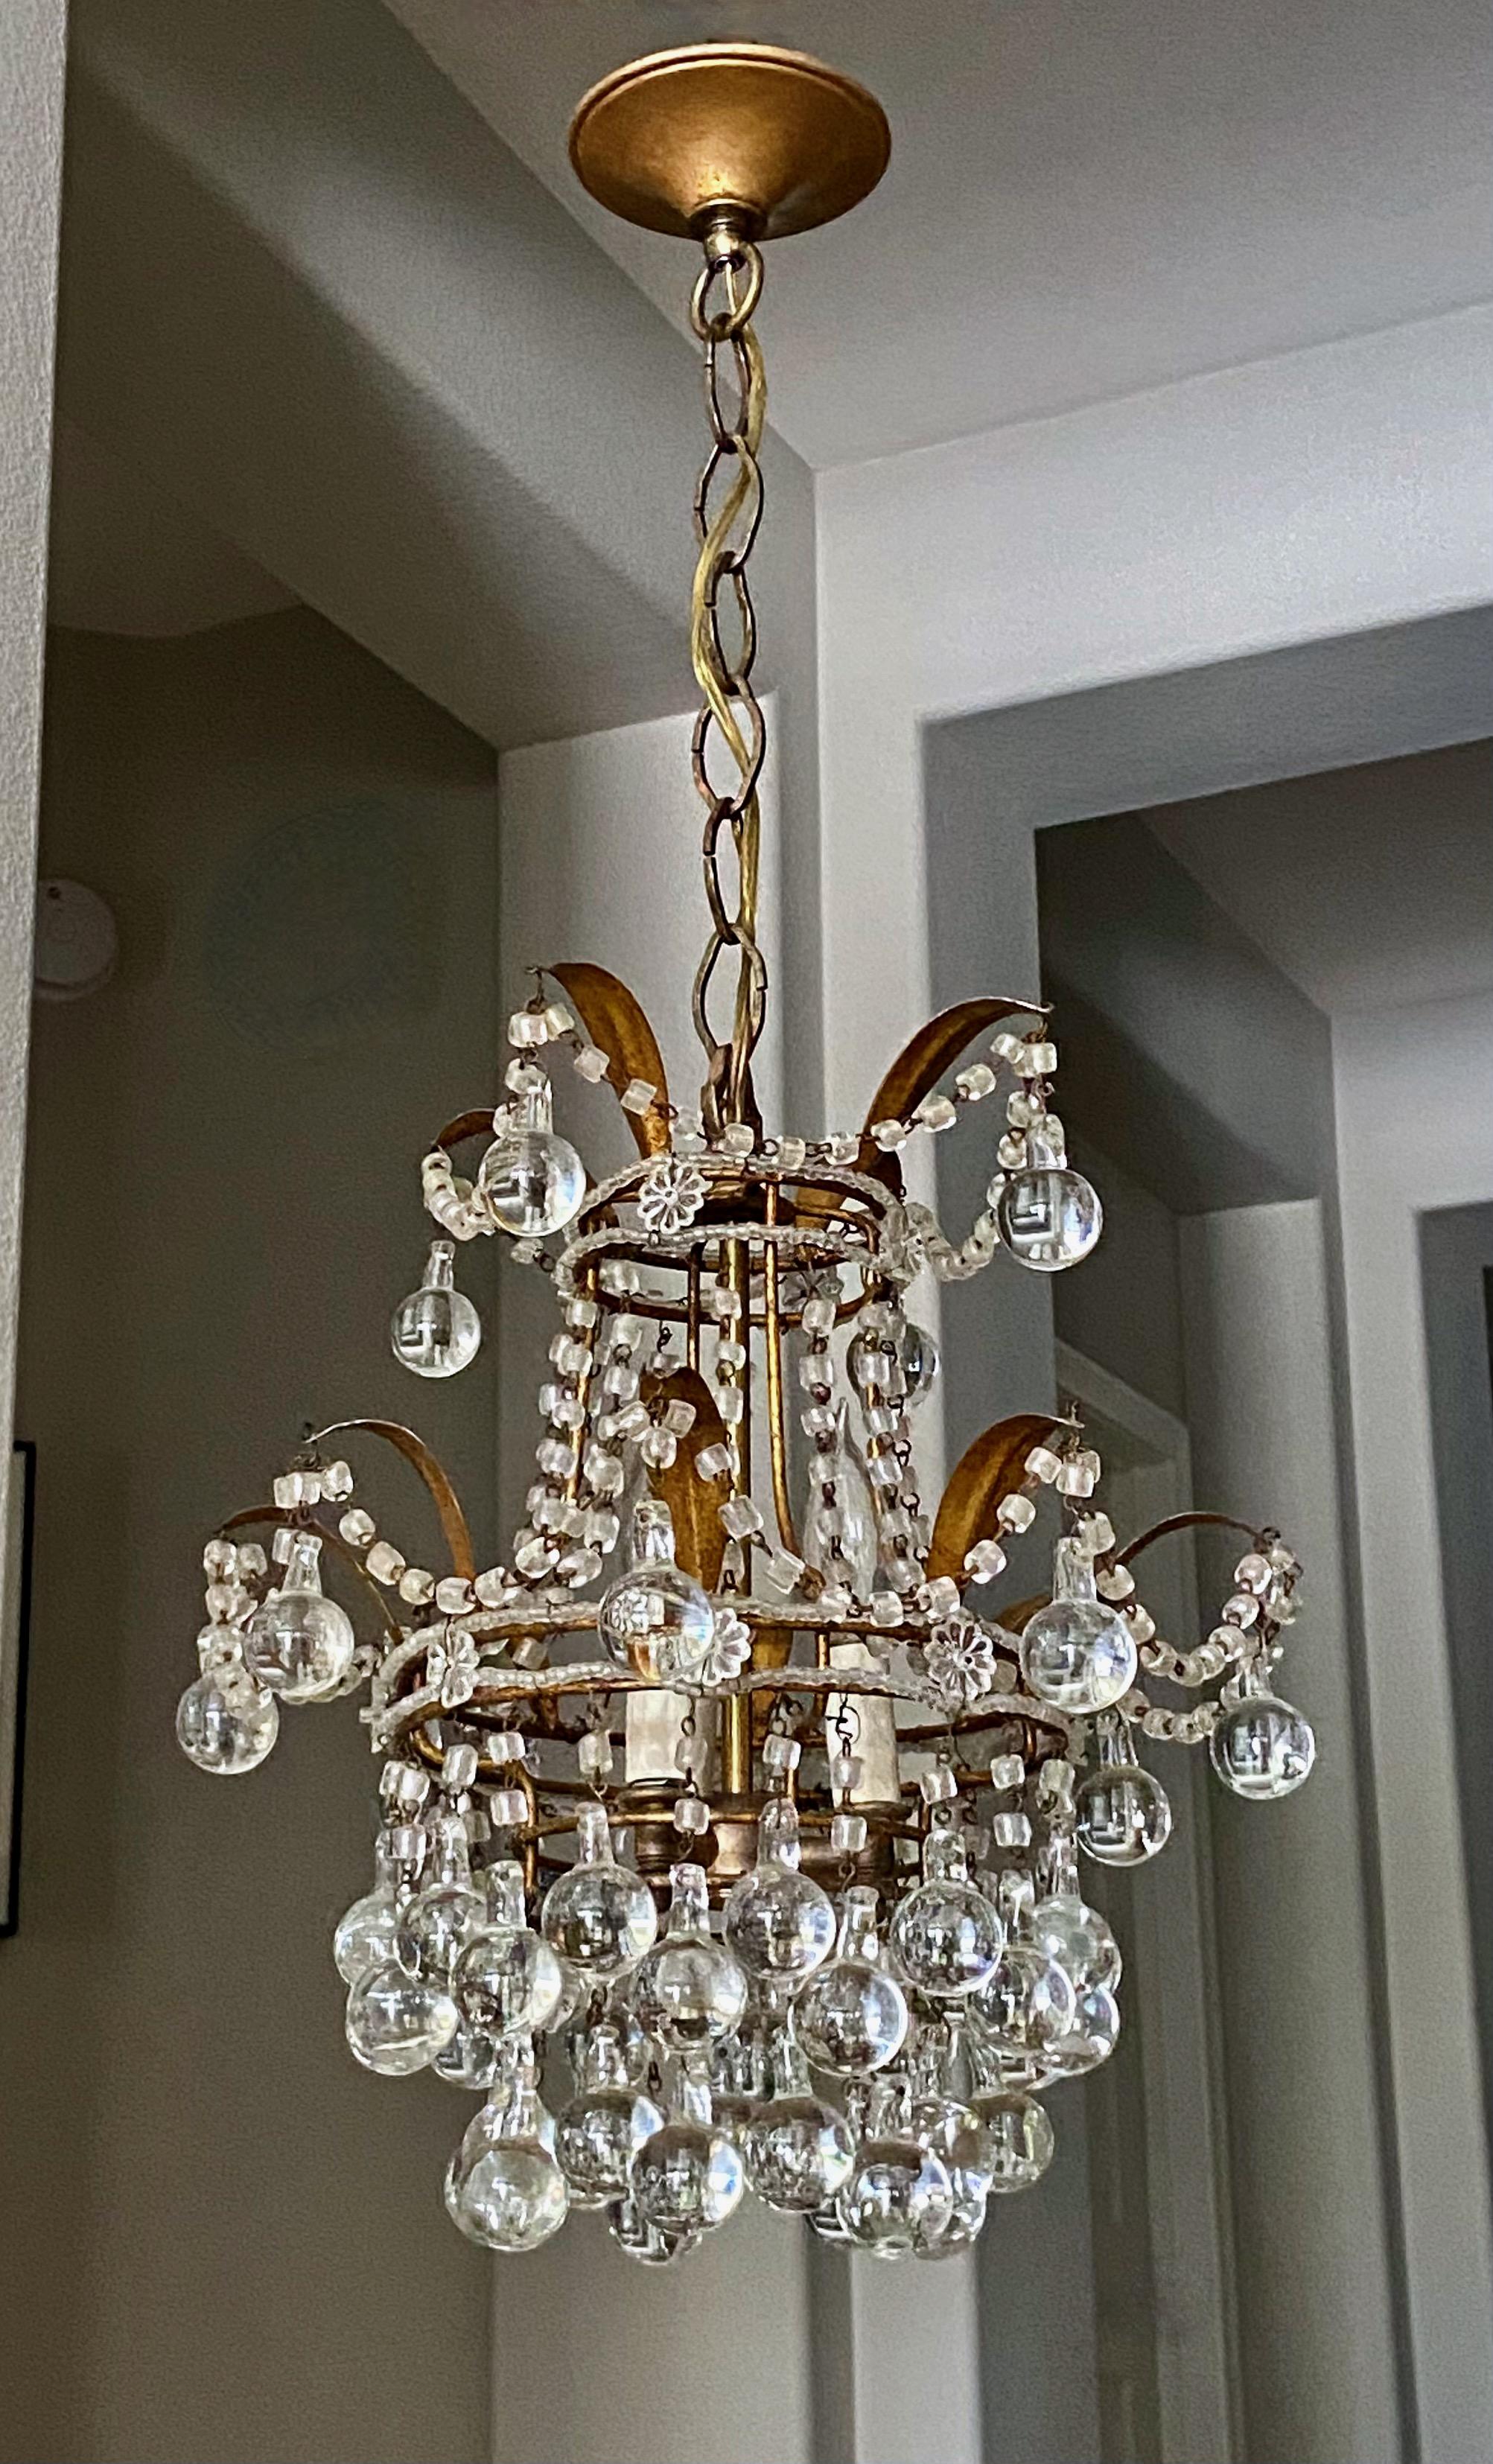 Petite scale Italian gilt metal tole chandelier pendant light. Covered with macaroni beaded swags, florets and crystal Murano drops. Uses 3 candelabra B base bulbs. 
The fixture measures 14